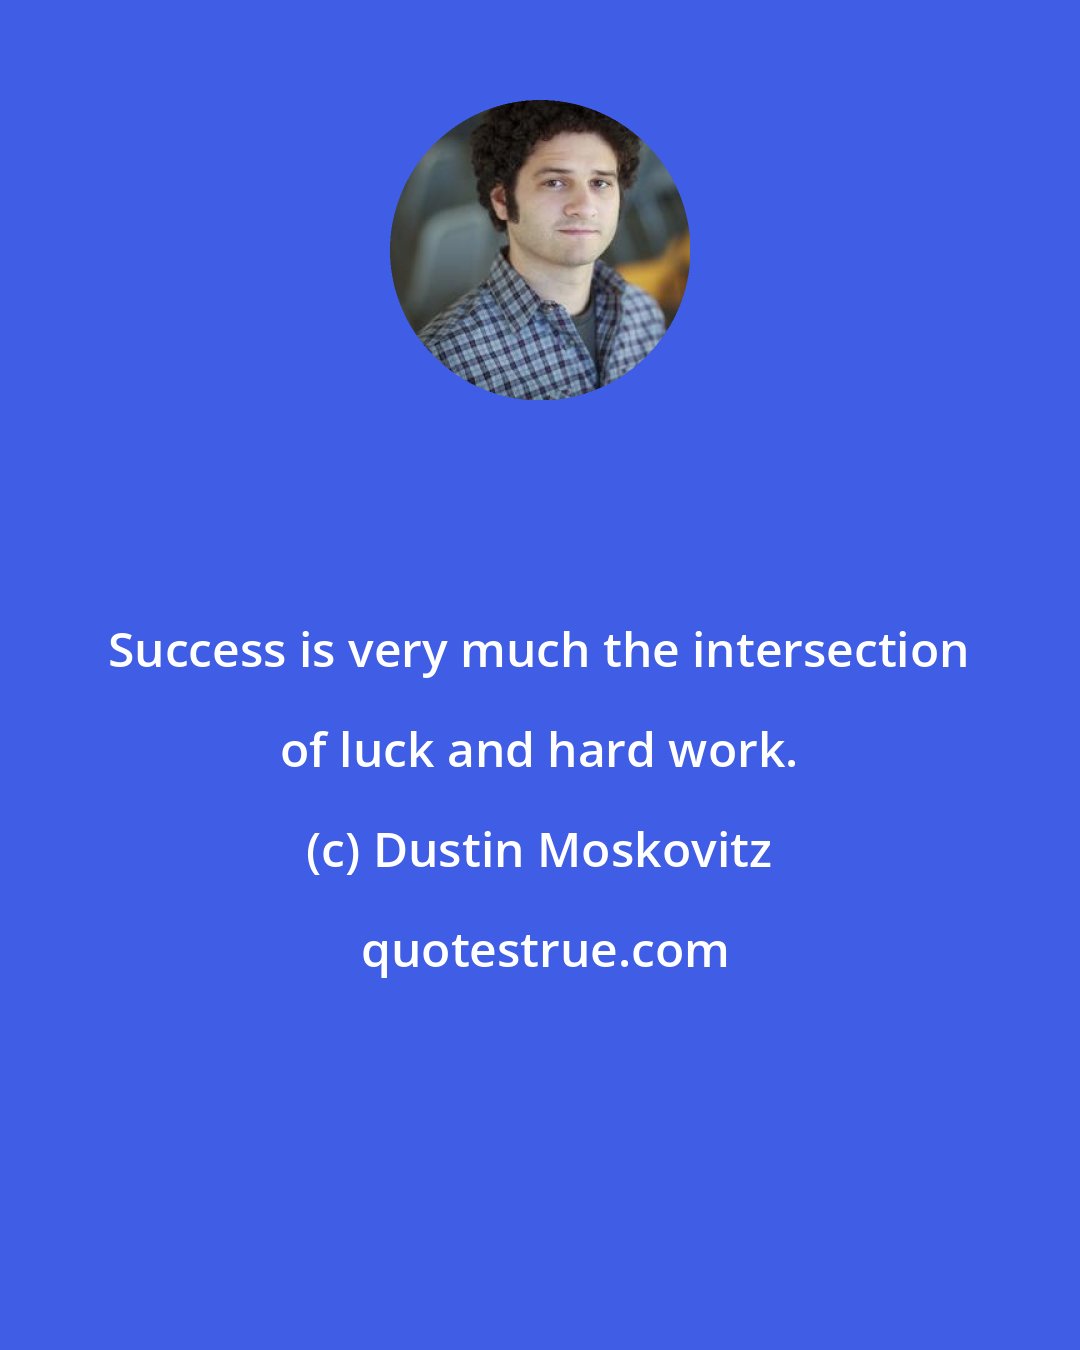 Dustin Moskovitz: Success is very much the intersection of luck and hard work.